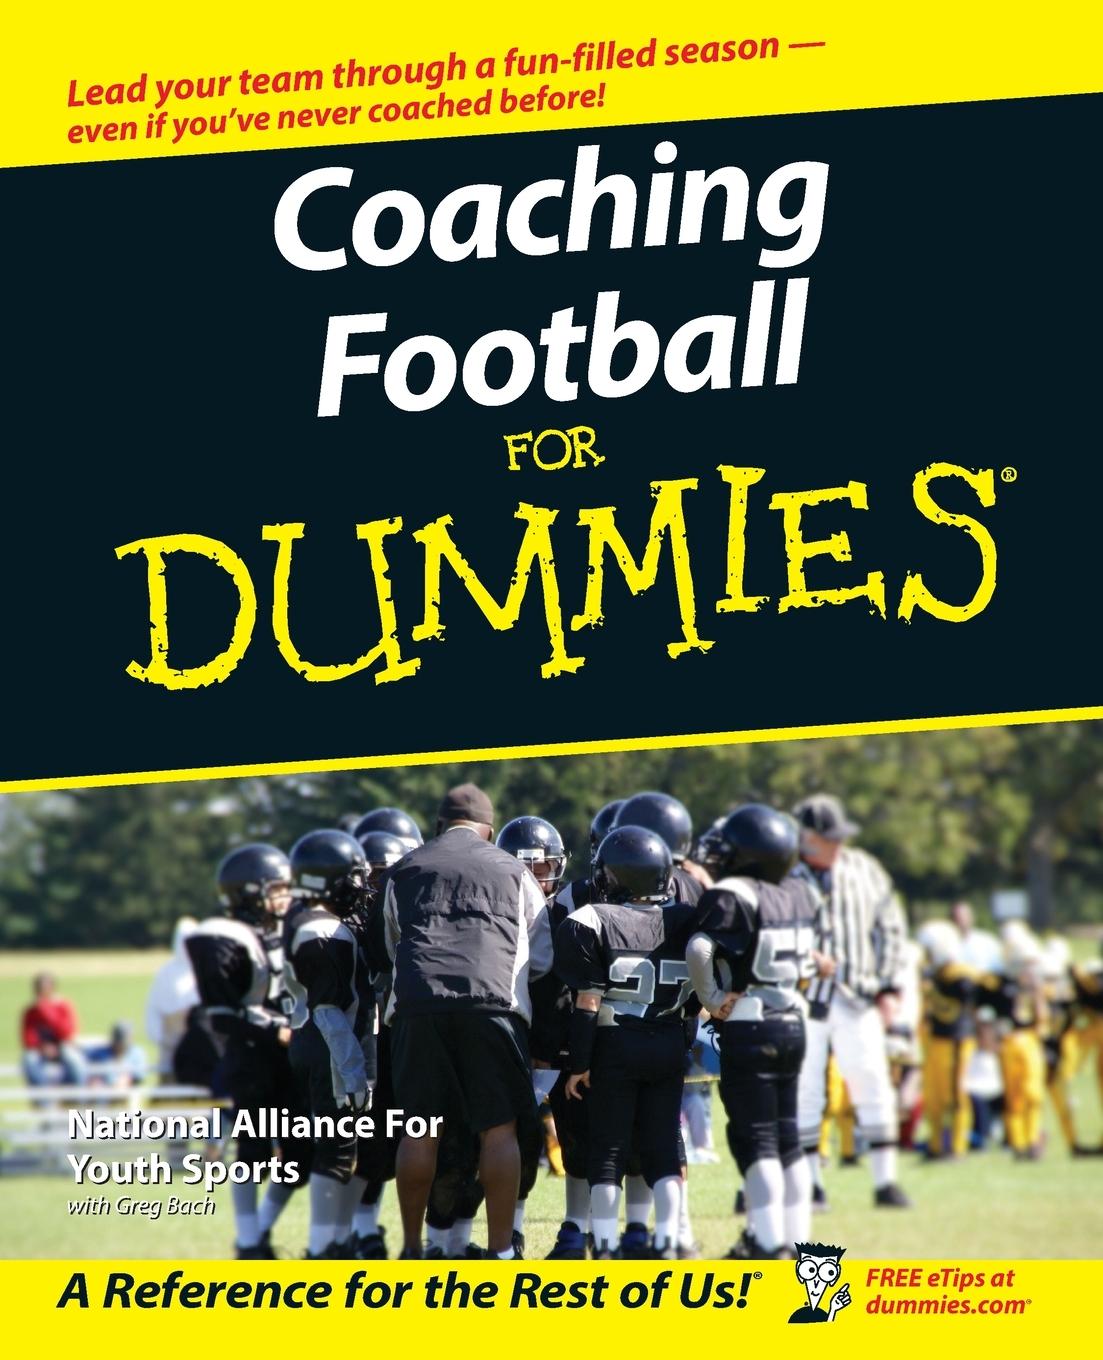 Coaching Football for Dummies / The National Alliance For Youth Sports / Taschenbuch / Kartoniert / Broschiert / Englisch / 2006 / Wiley / EAN 9780471793311 - The National Alliance For Youth Sports